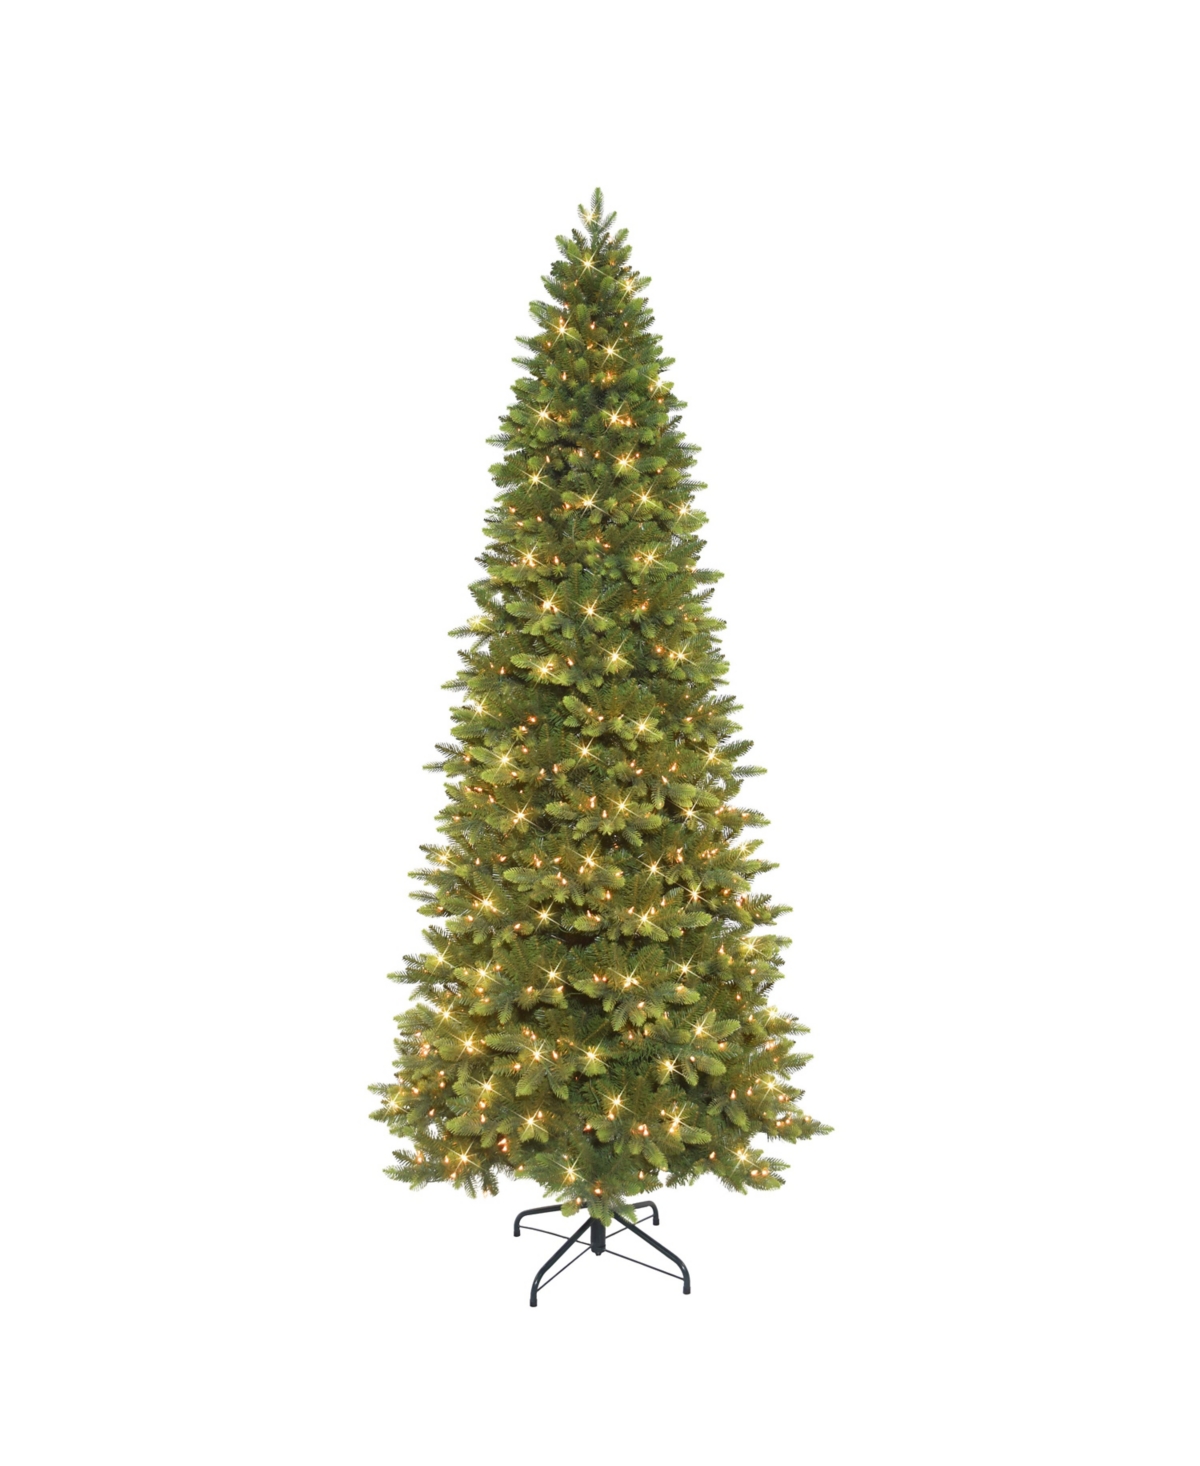 Puleo 9' Pre-lit Slim Westford Spruce Tree With 700 Underwriters Laboratories Clear Incandescent Lights, 2 In Green